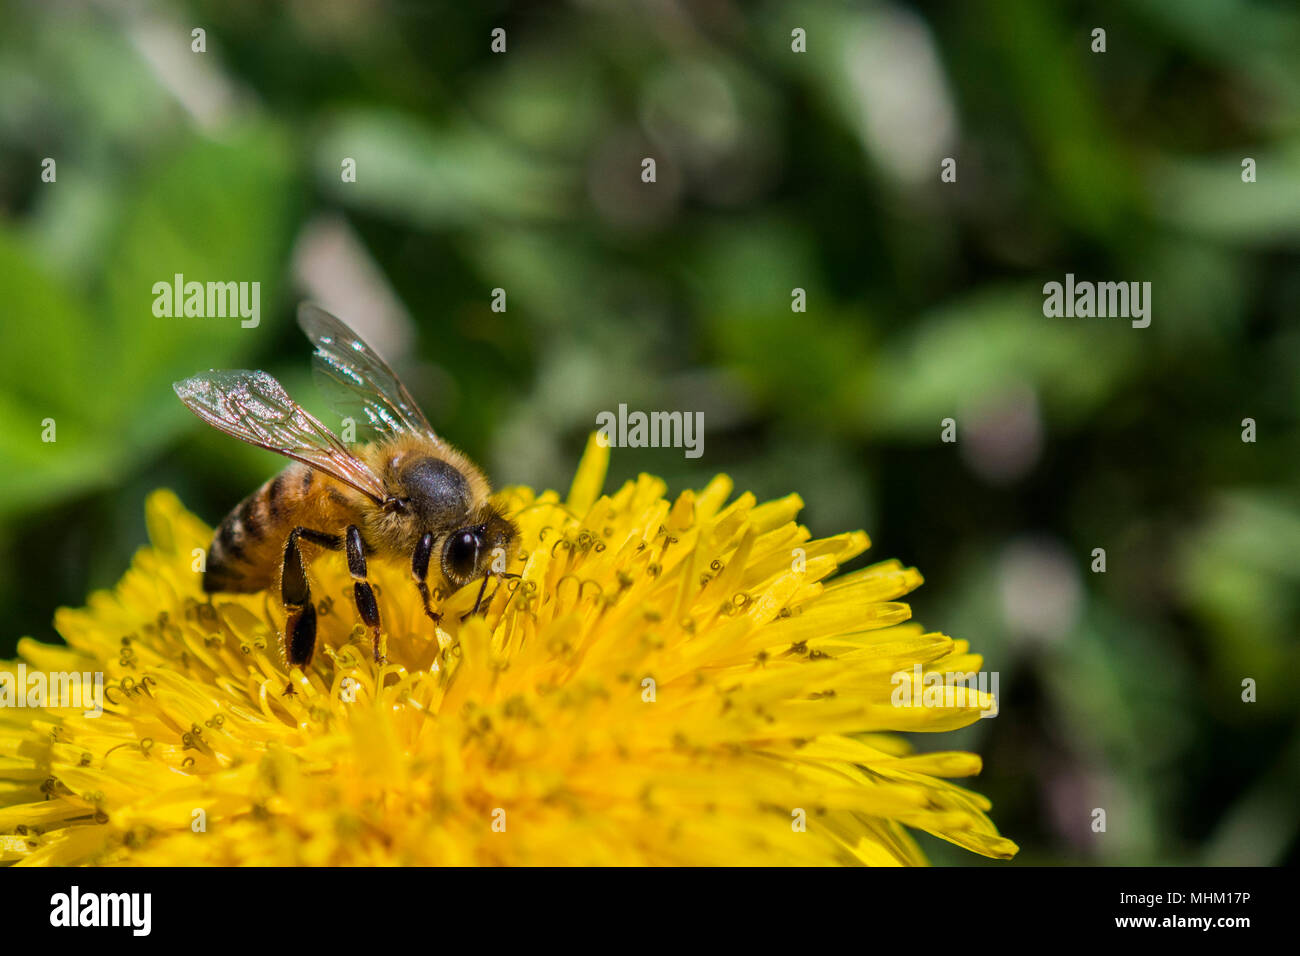 Honey bee collecting pollen on a bright yellow dandelion flower. Stock Photo